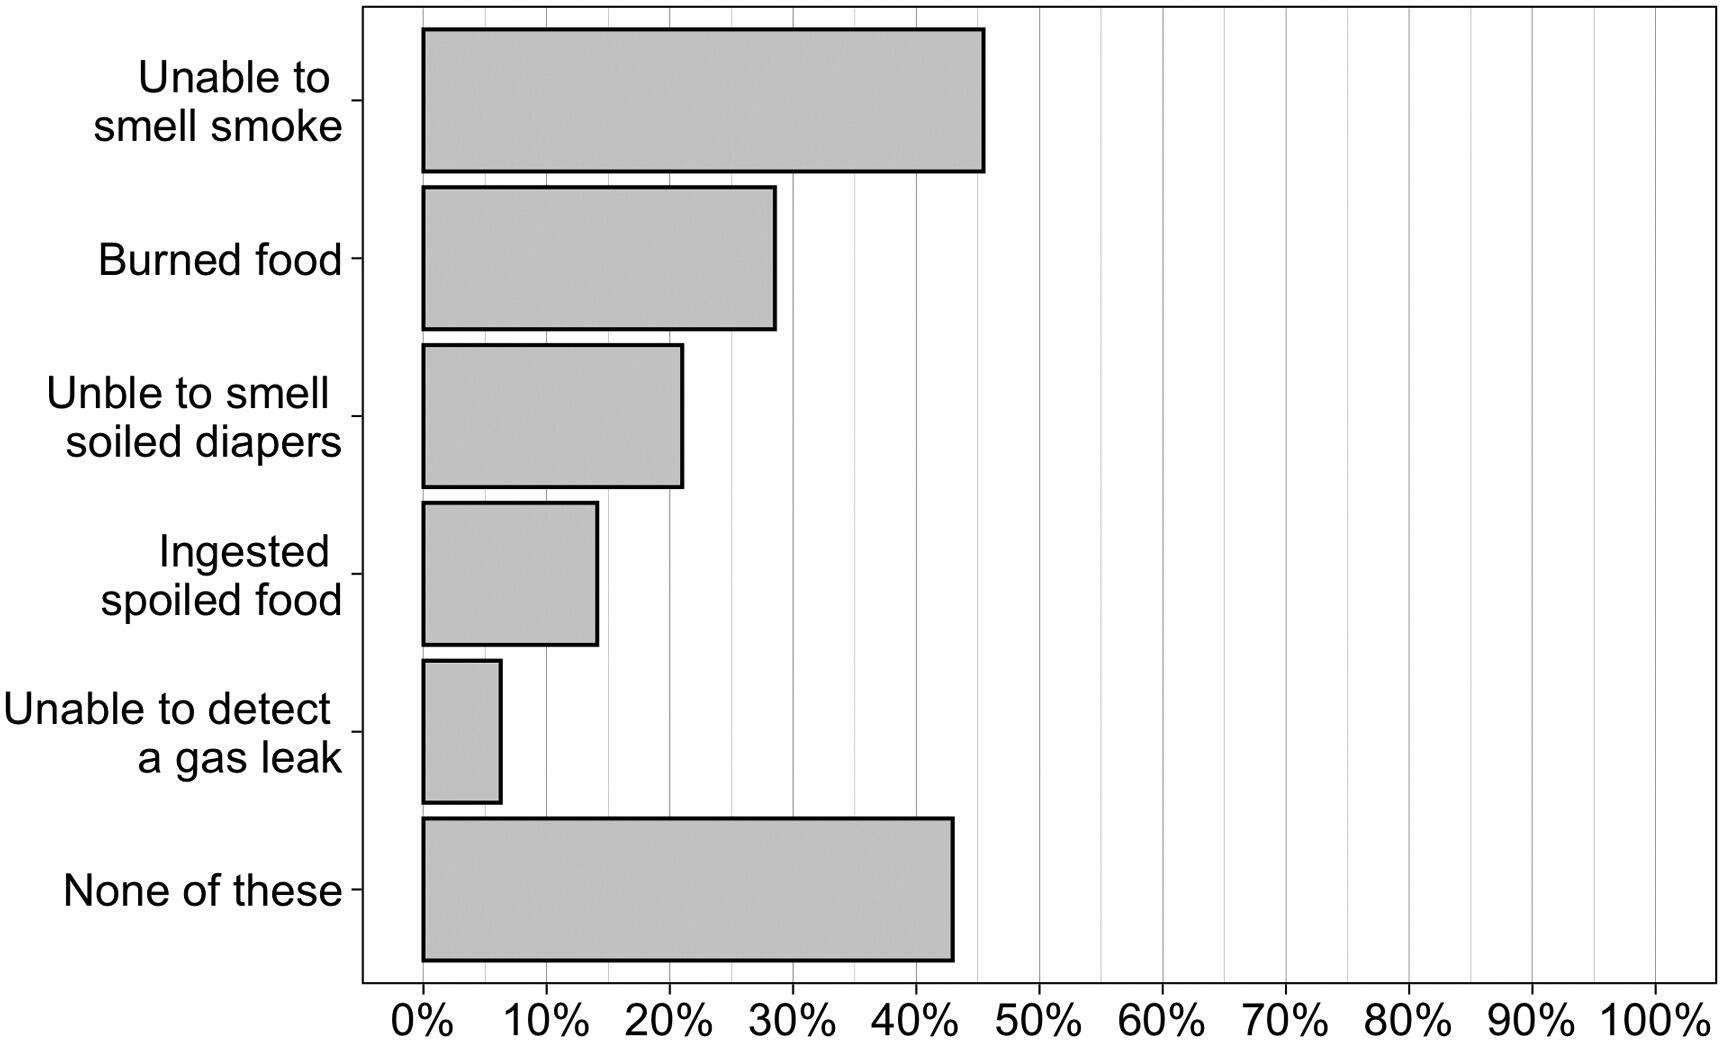 A VCU survey of 322 respondents shows the prevalence of safety issues for COVID-19 survivors with loss of smell or taste. The most pressing concern respondents reported was inability to smell smoke (45%).